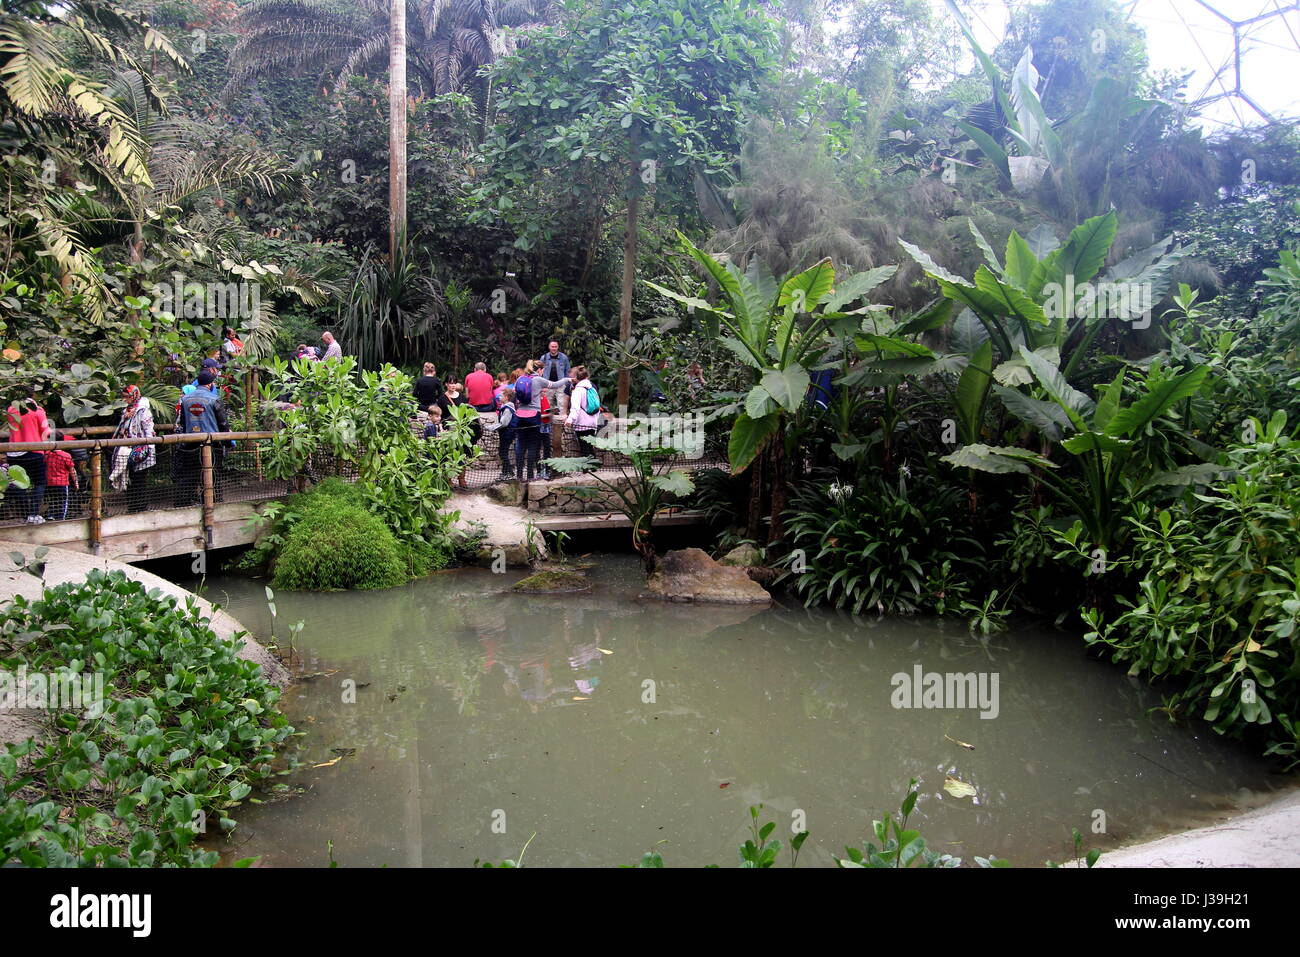 Bodelva, Cornwall, UK - April 4 2017: Interior of the Tropical biome at the Eden Project Environmental exhibition in Cornwall, England Stock Photo